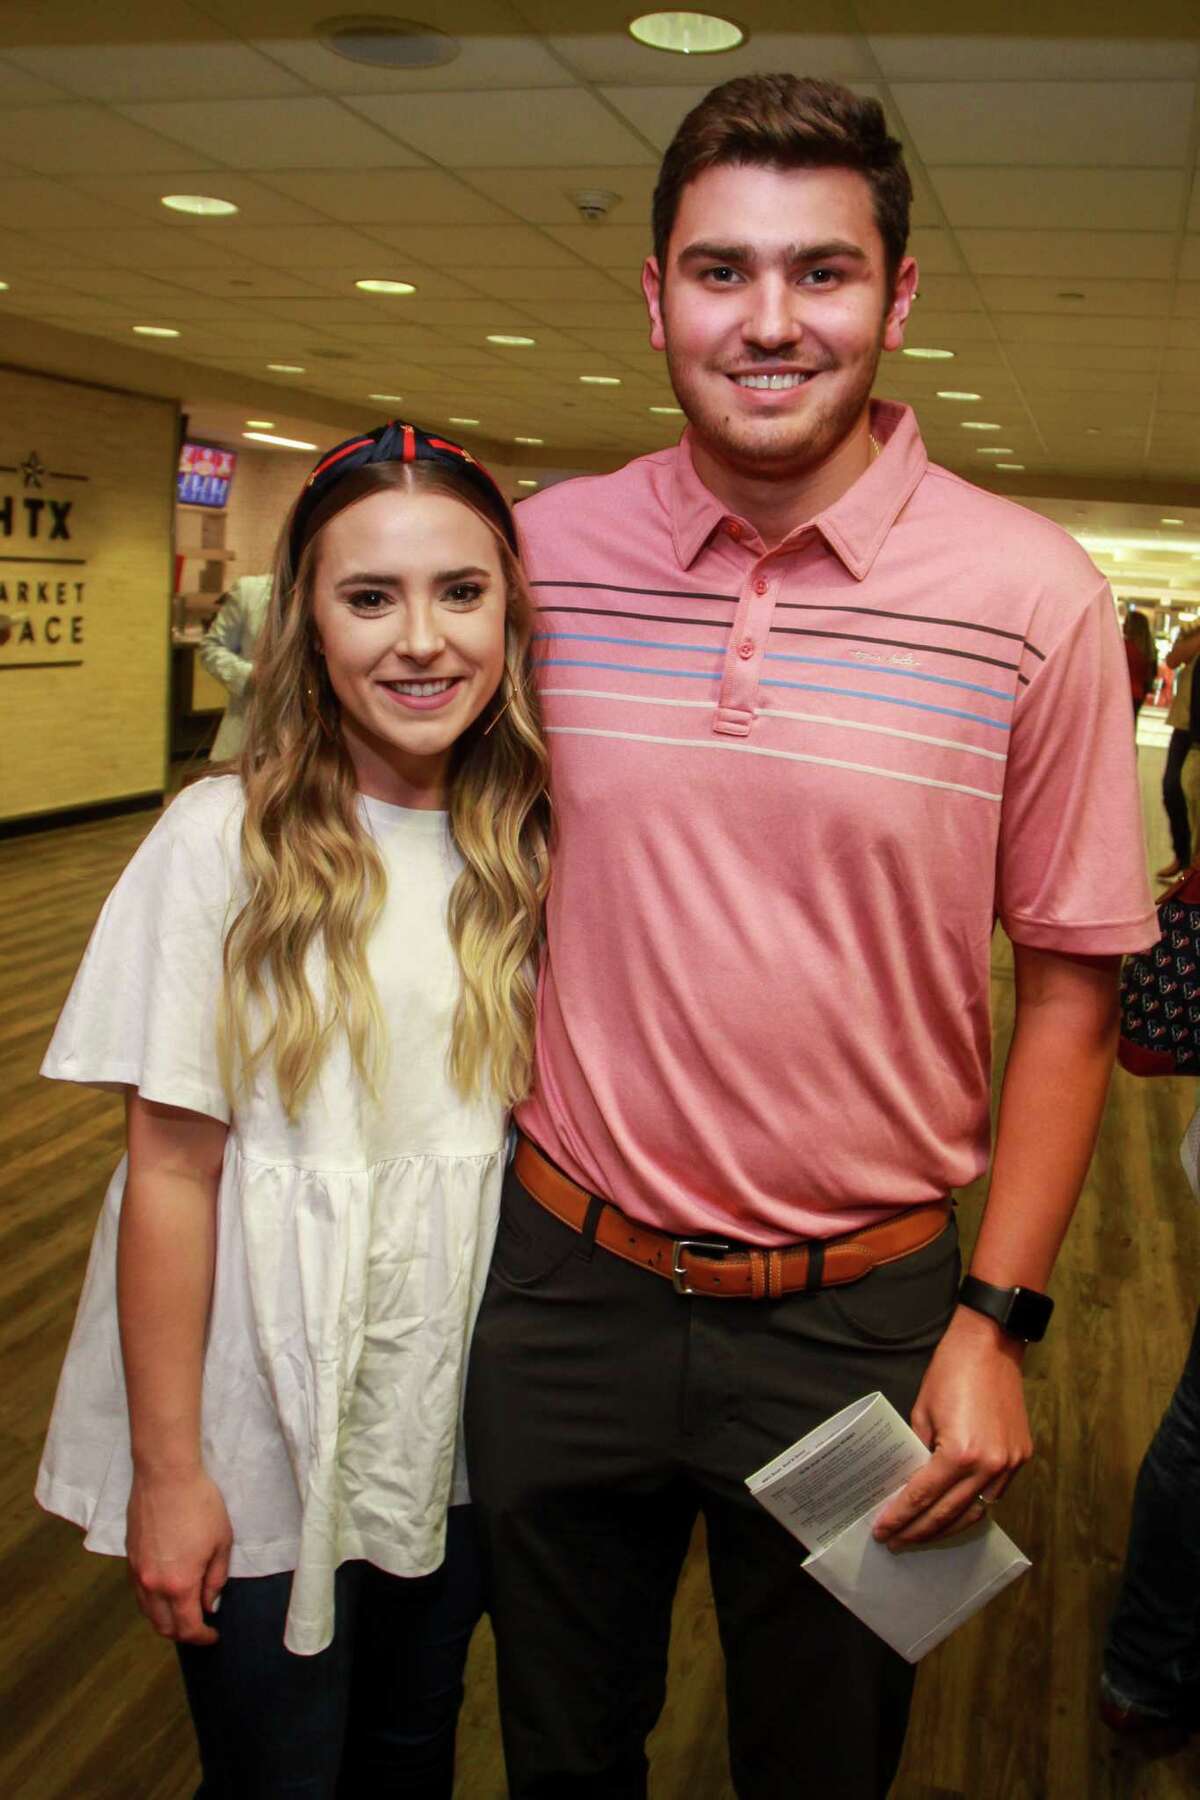 Dallas and Court Brown at Today's Harbor for Children's annual Fantasy Football Draft at NRG Stadium on September 4, 2019.